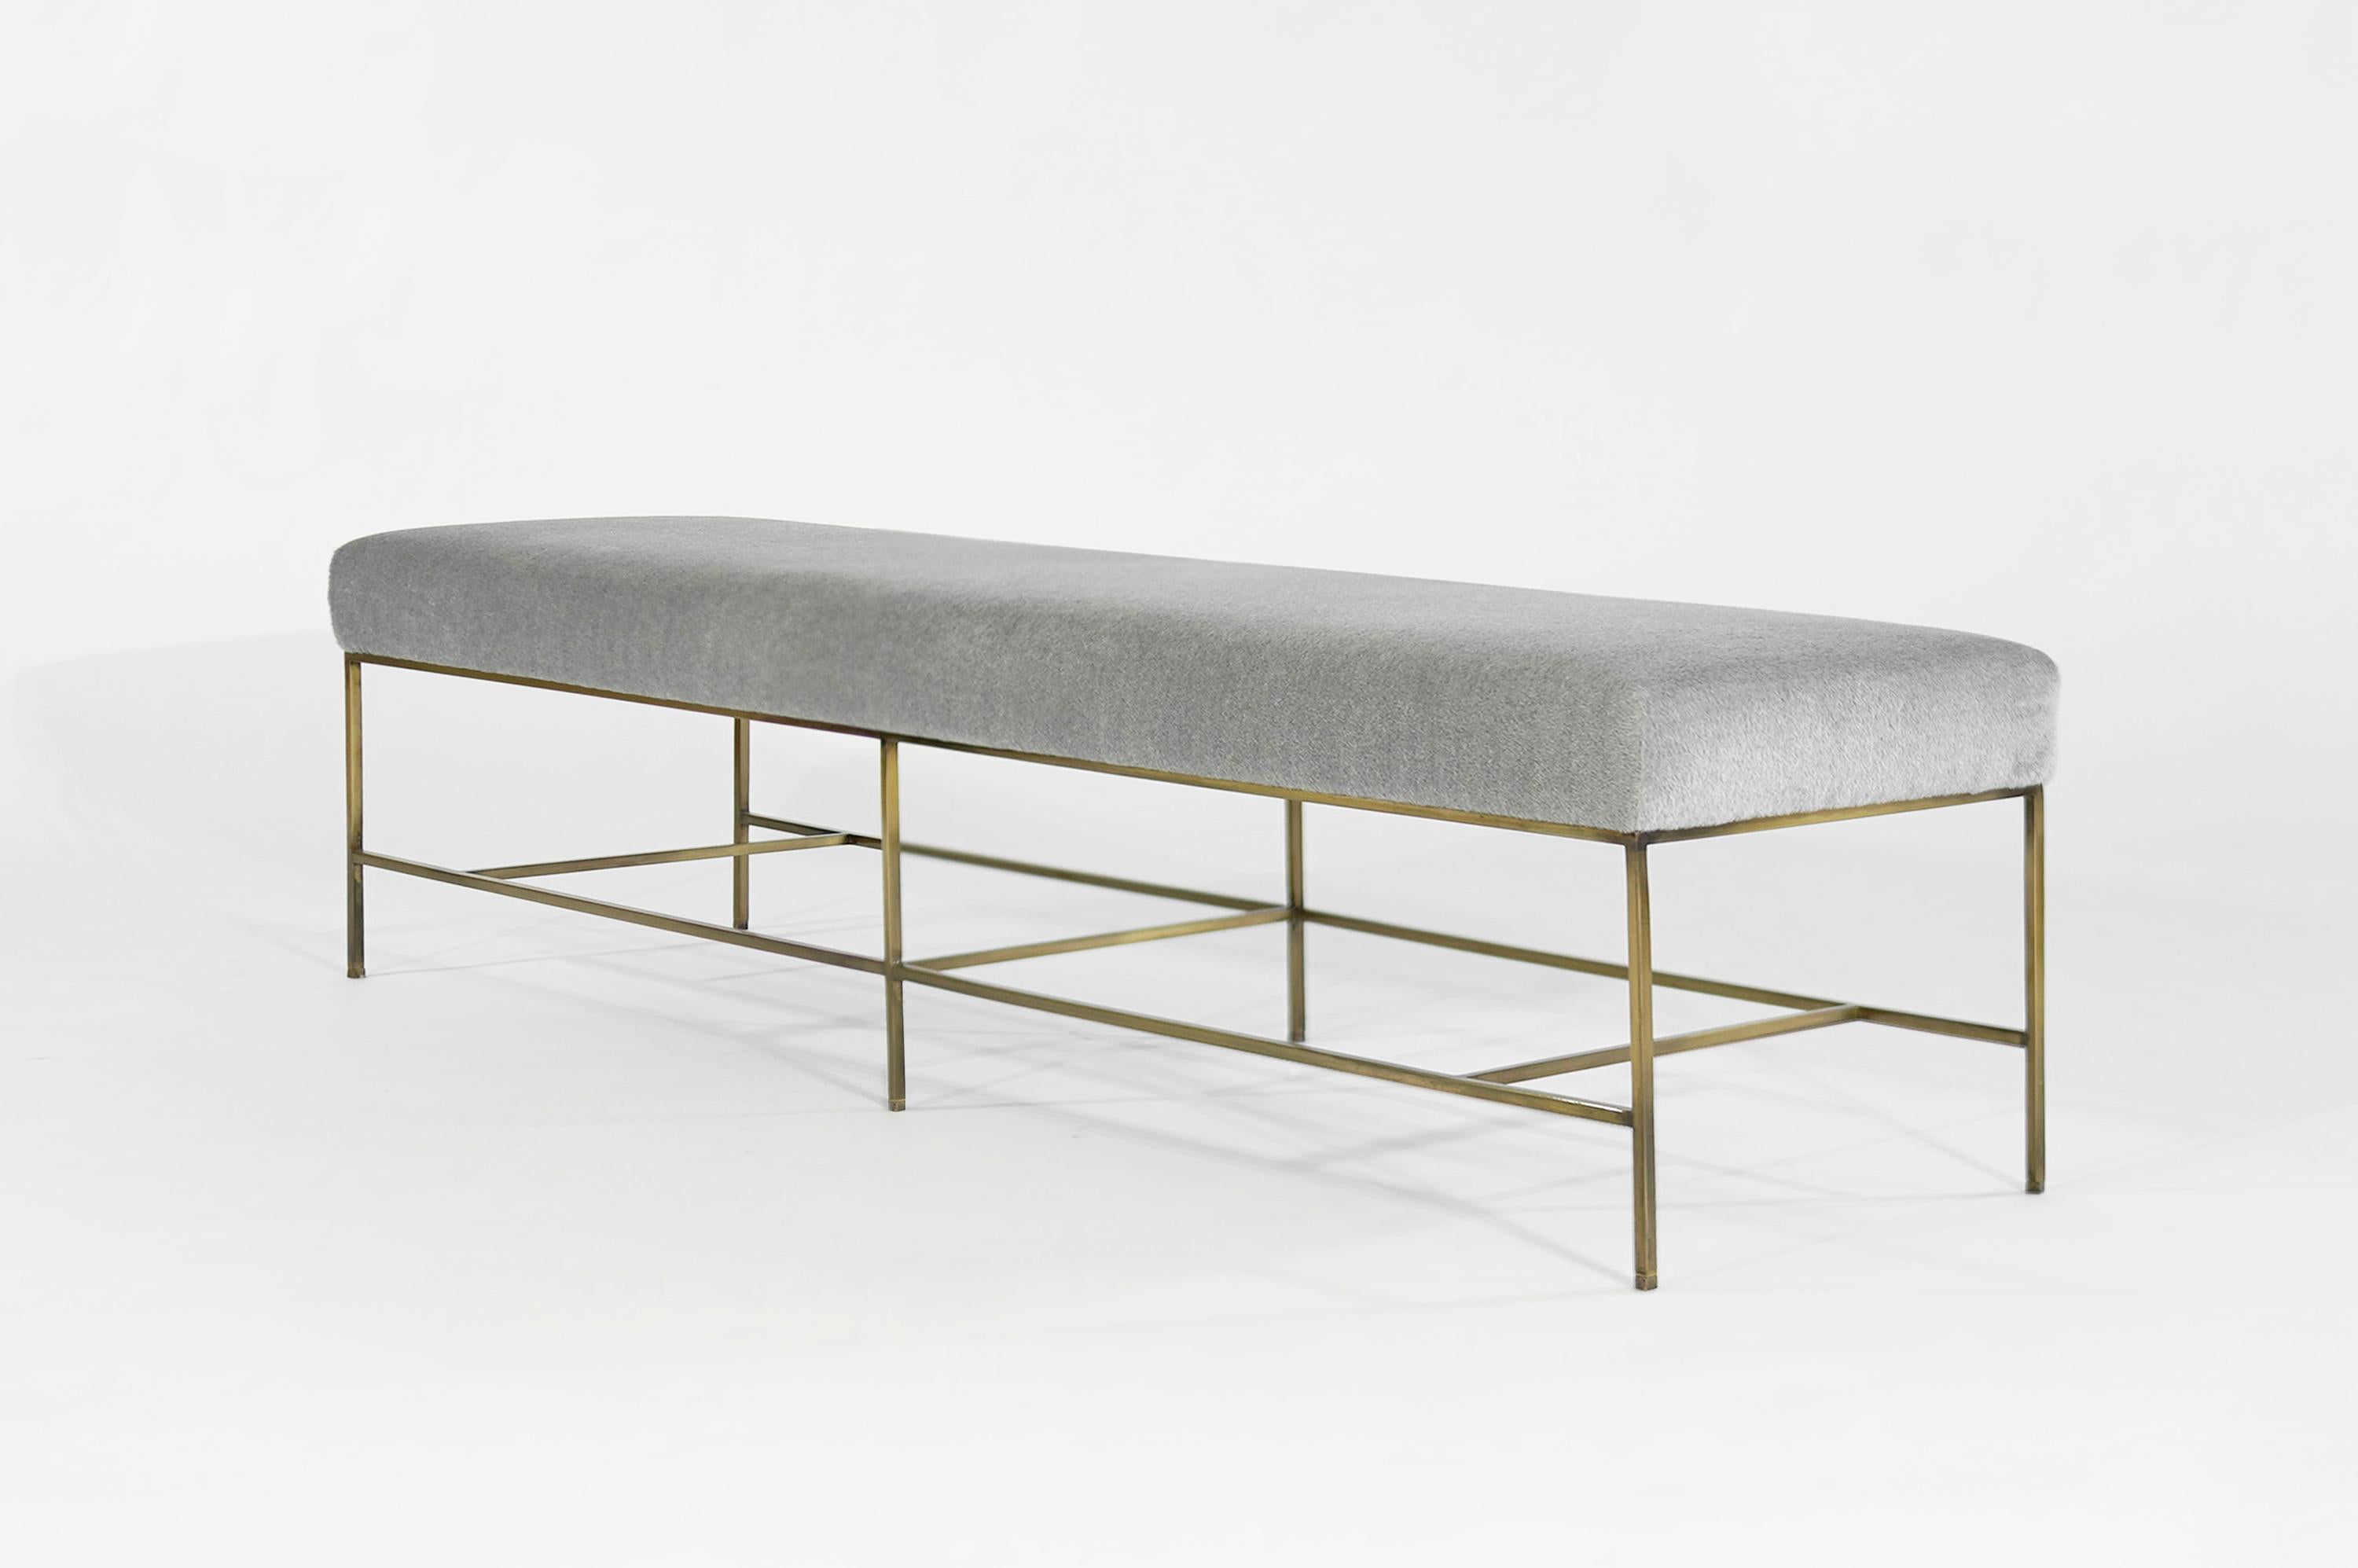 Introducing The Architectural Bench by Carlos Solano for Stamford Modern—a sleek and sophisticated addition to any contemporary space. Meticulously crafted with an all-metal construction, this bench epitomizes the essence of minimalistic design.